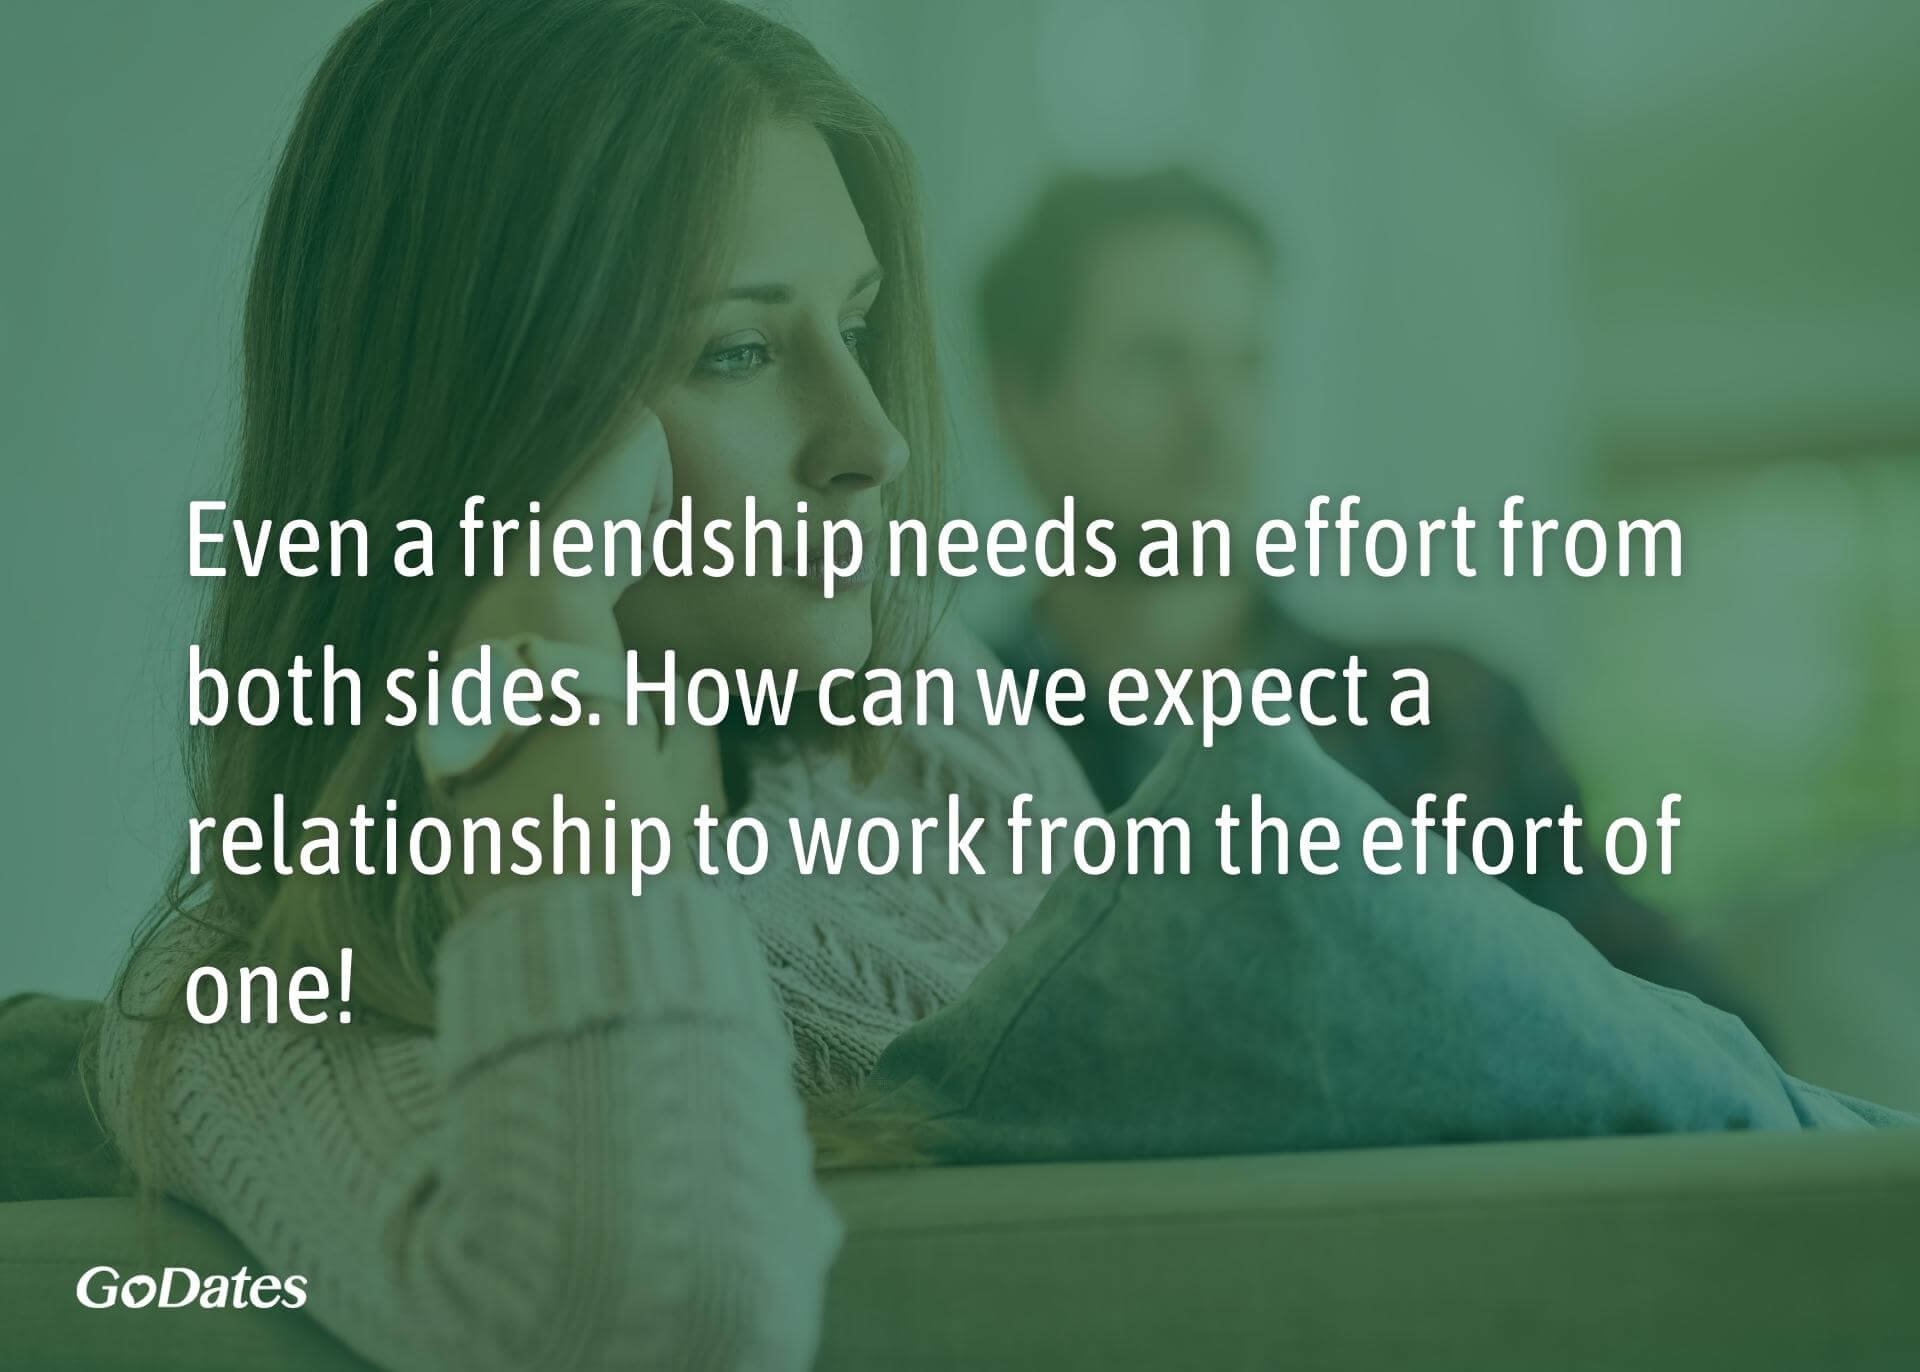 How can we expect a relationship to work from effort of one side quote